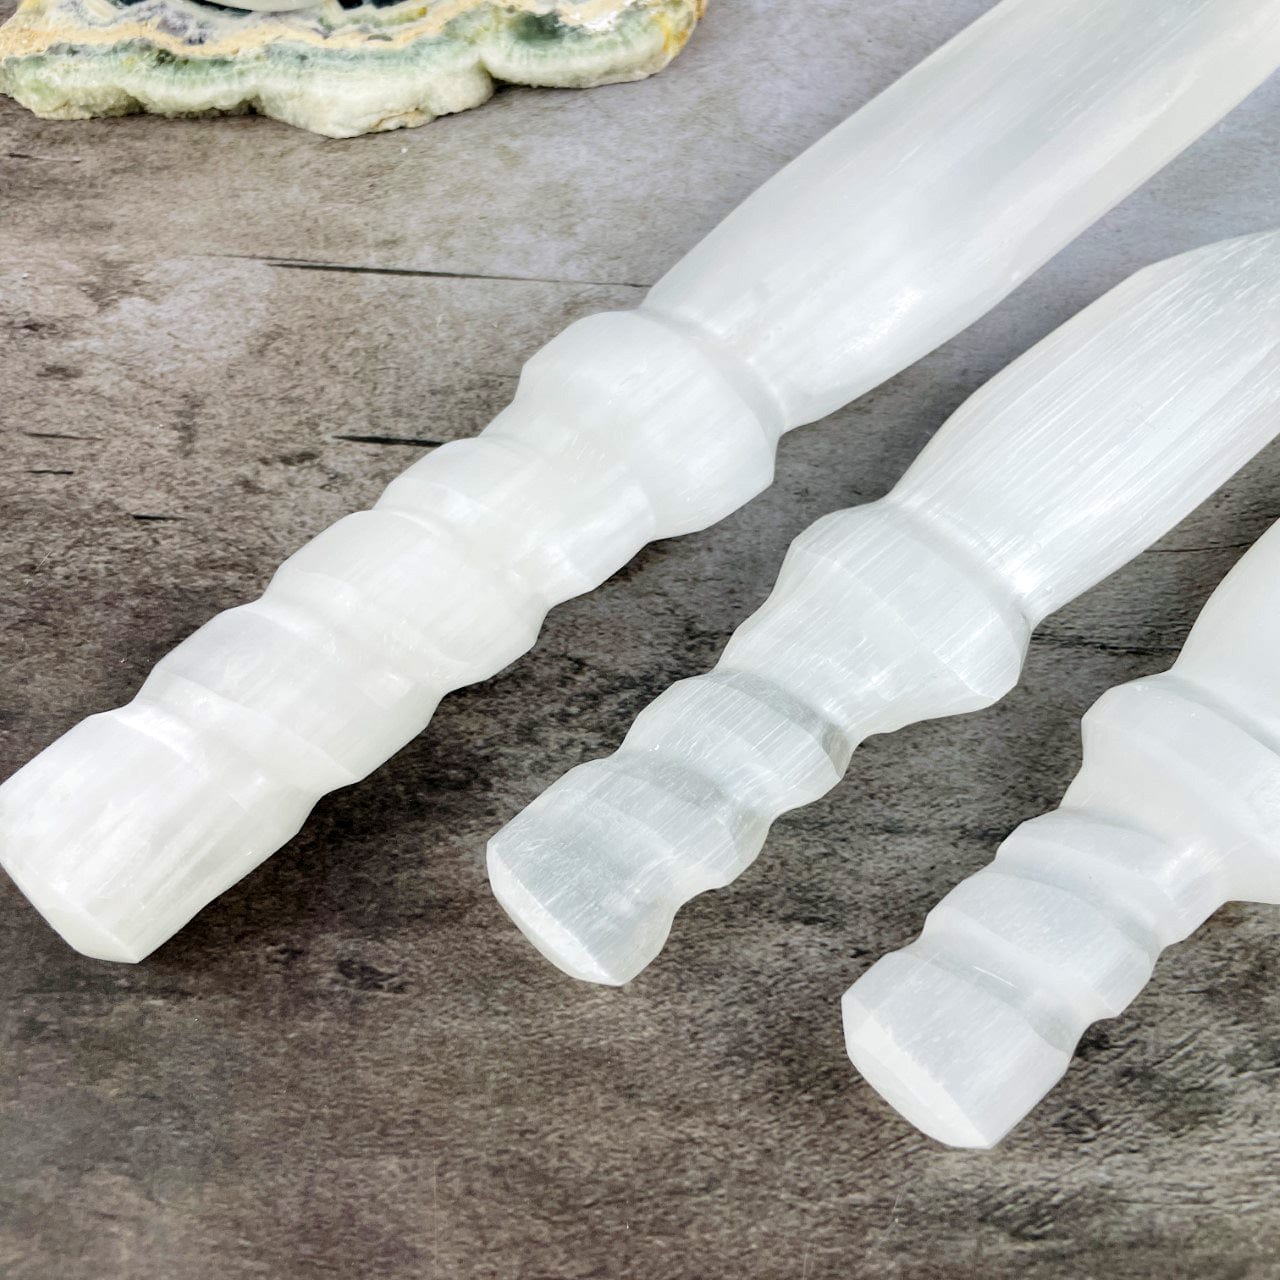 3 sizes of Selenite Knives with Twisted Handles close up